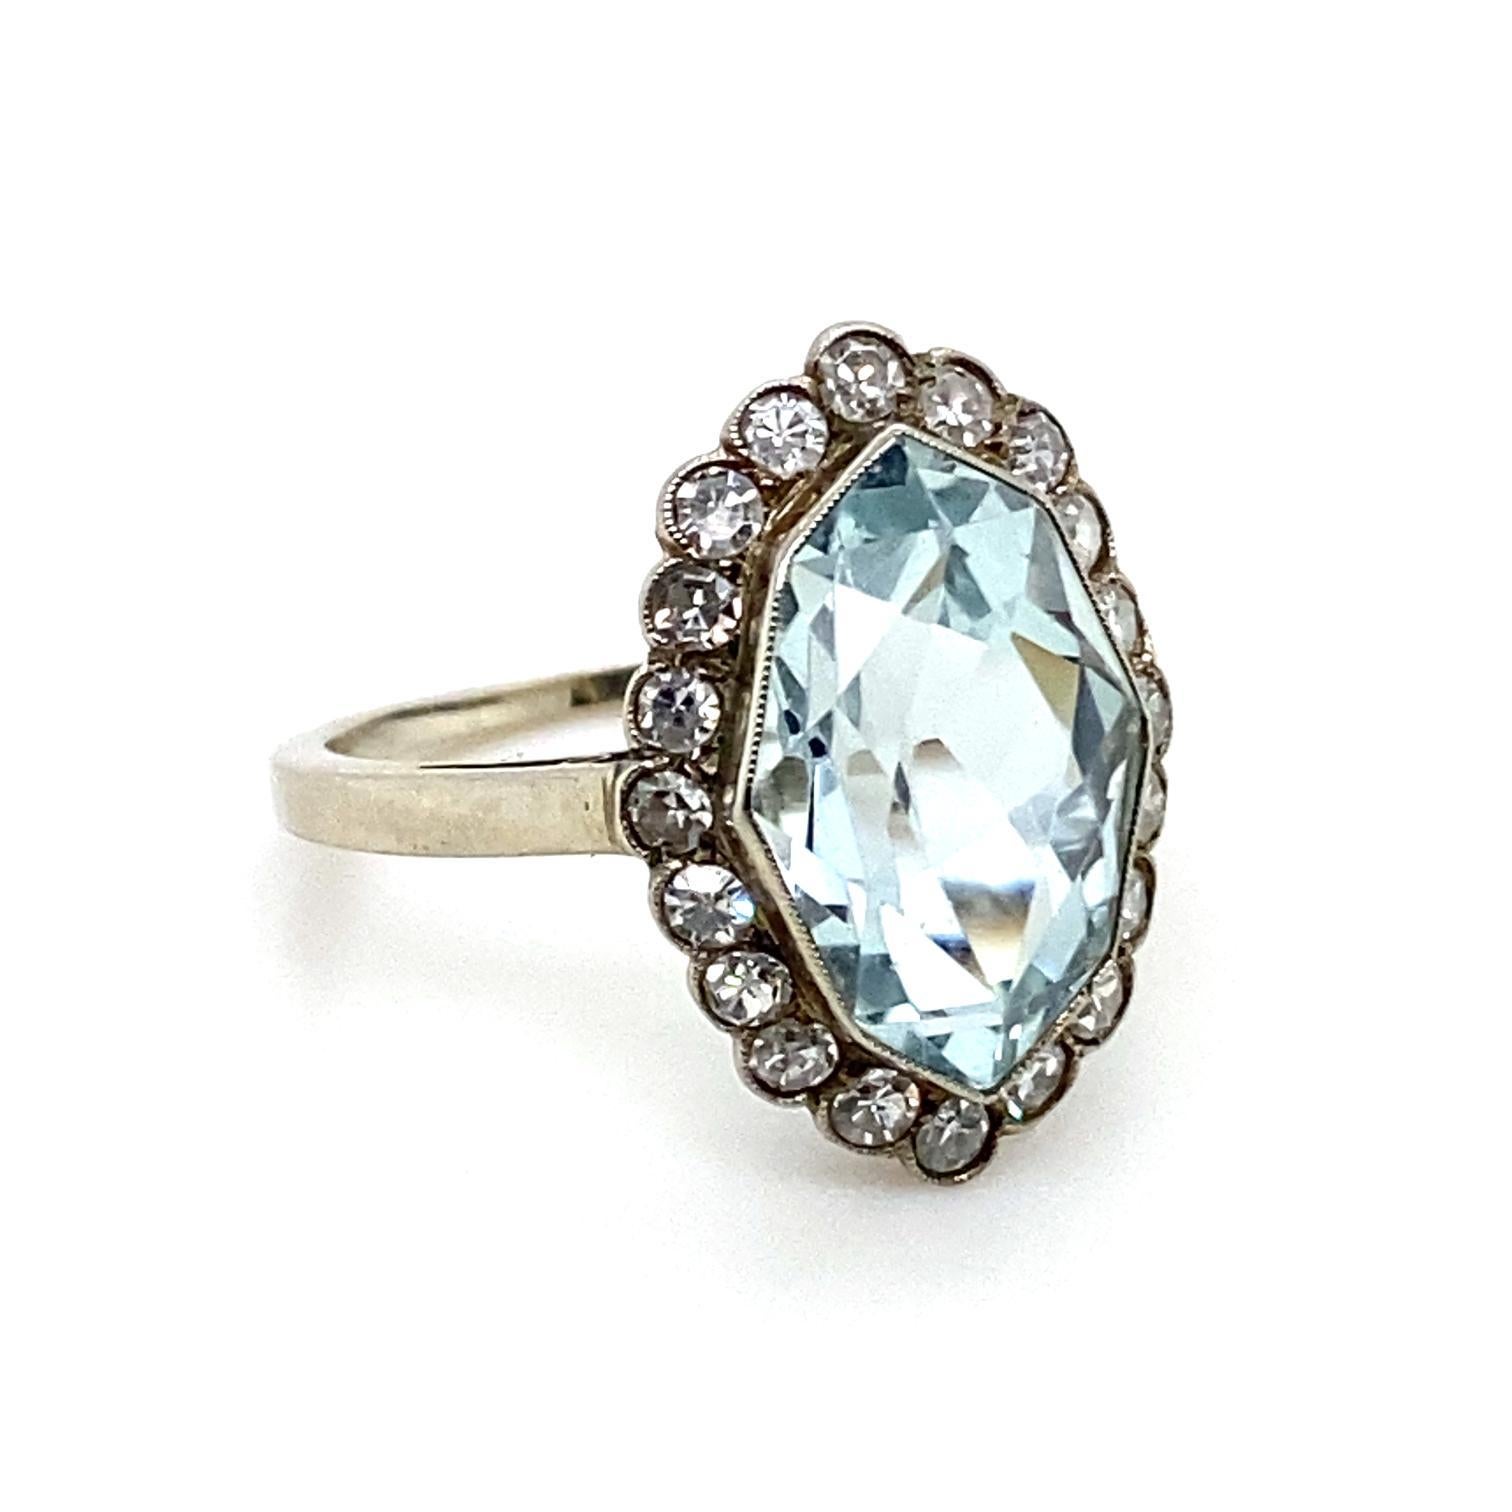 An aquamarine and diamond cluster 14 karat white gold engagement ring.

This handmade piece is centrally set with a mixed oval cut aquamarine of 4.93cts approximately within a milgrain set bezel, surrounded by a cluster of 19 single cut diamonds